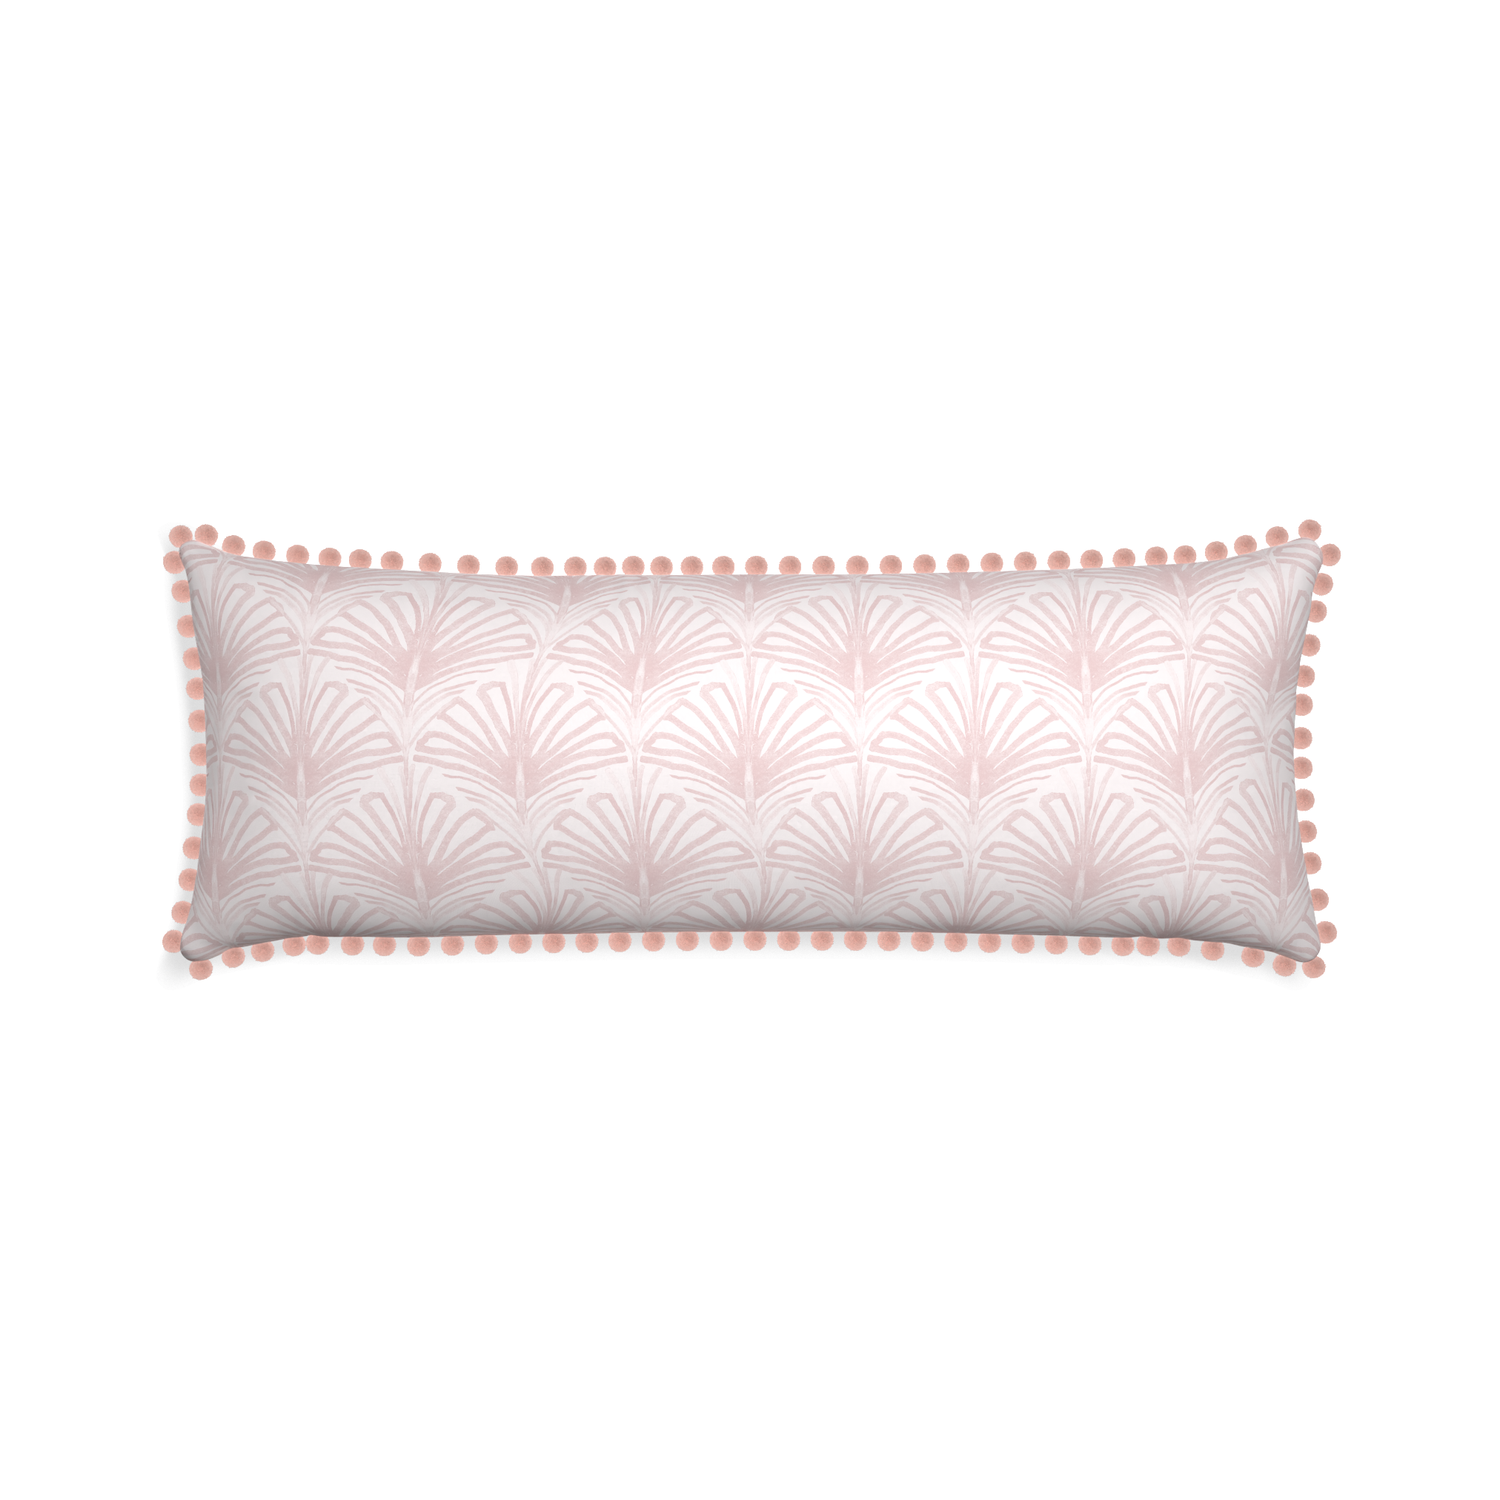 Xl-lumbar suzy rose custom rose pink palmpillow with rose pom pom on white background